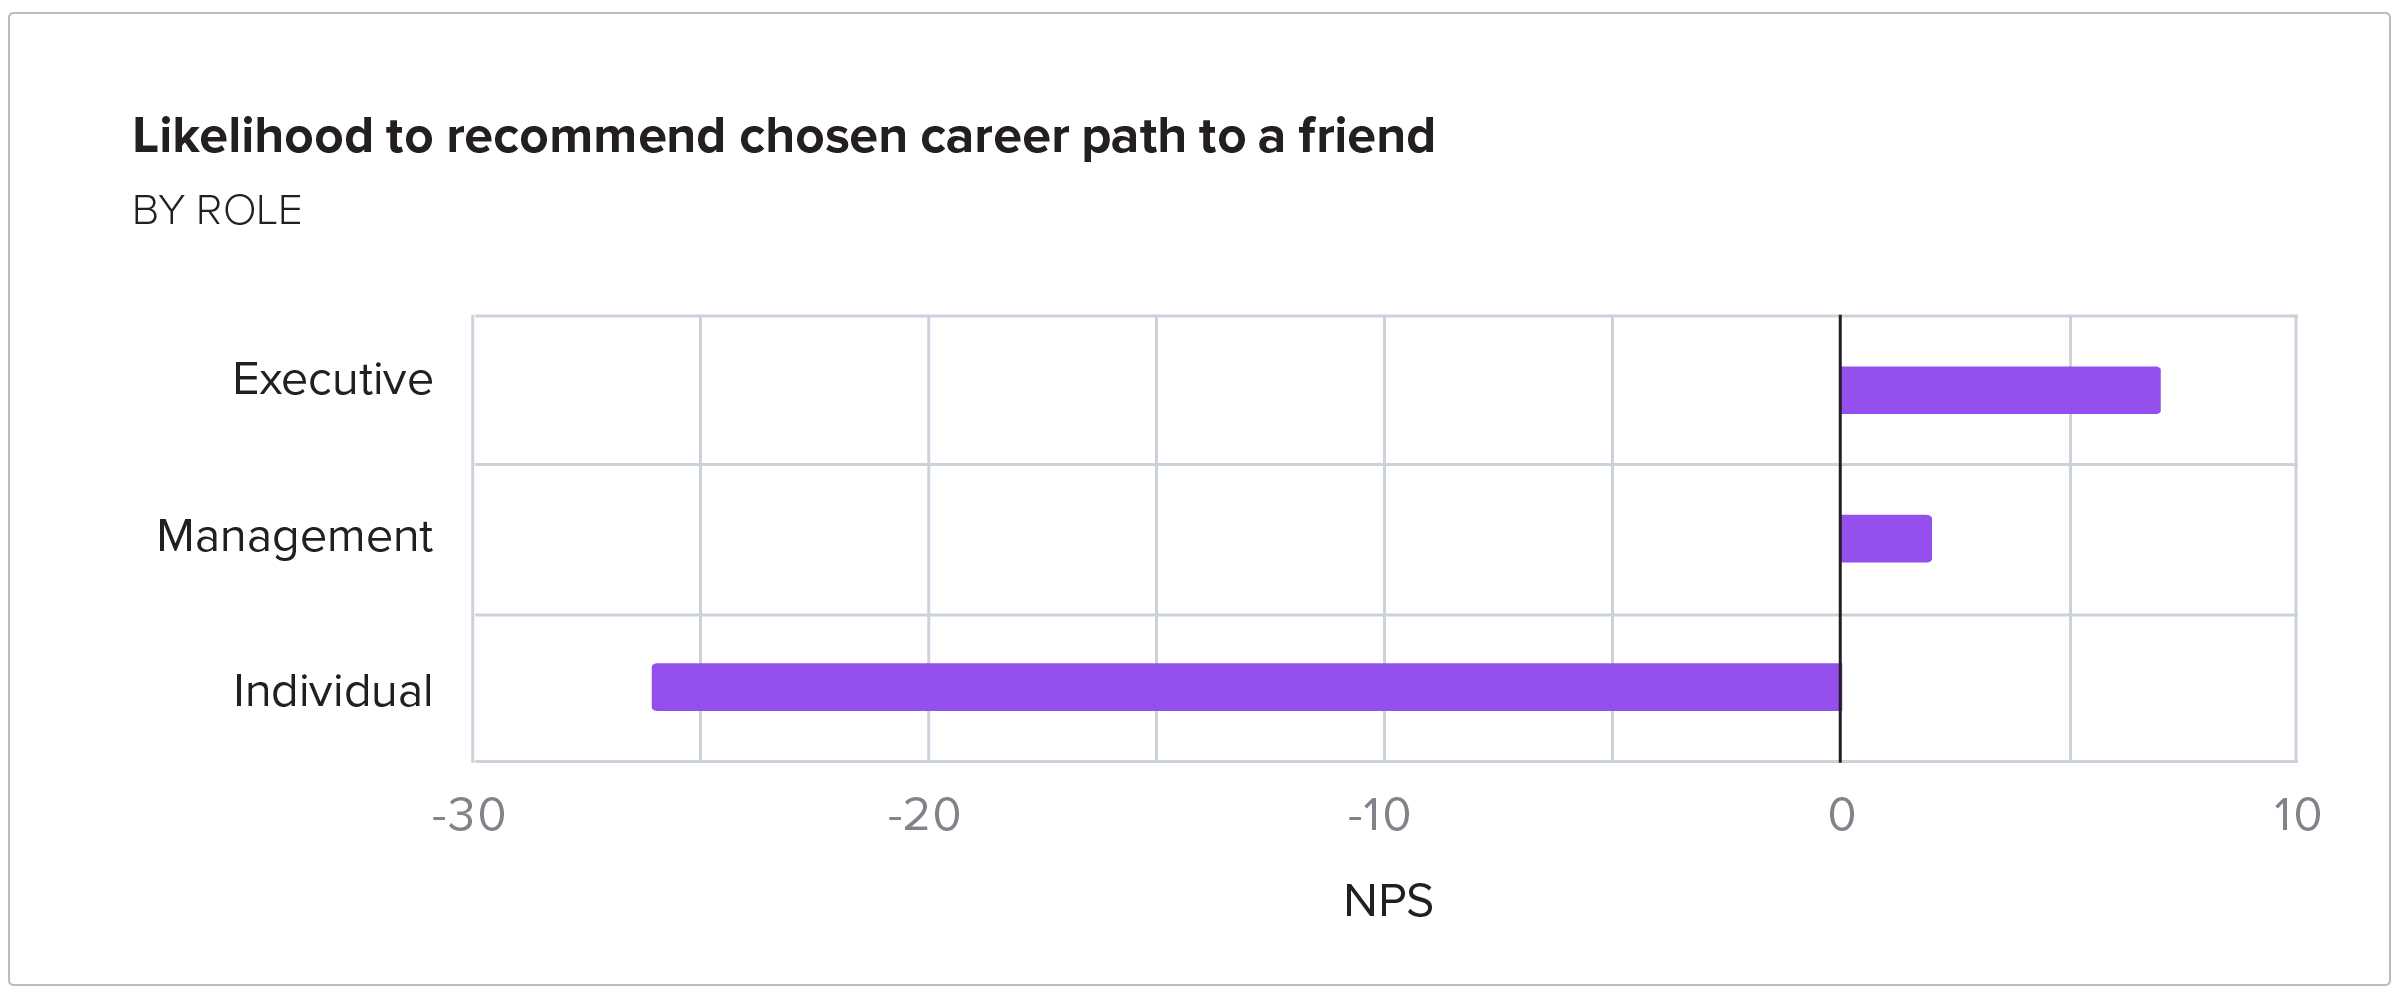 Likelihood to recommend chosen career path to a friend BY ROLE